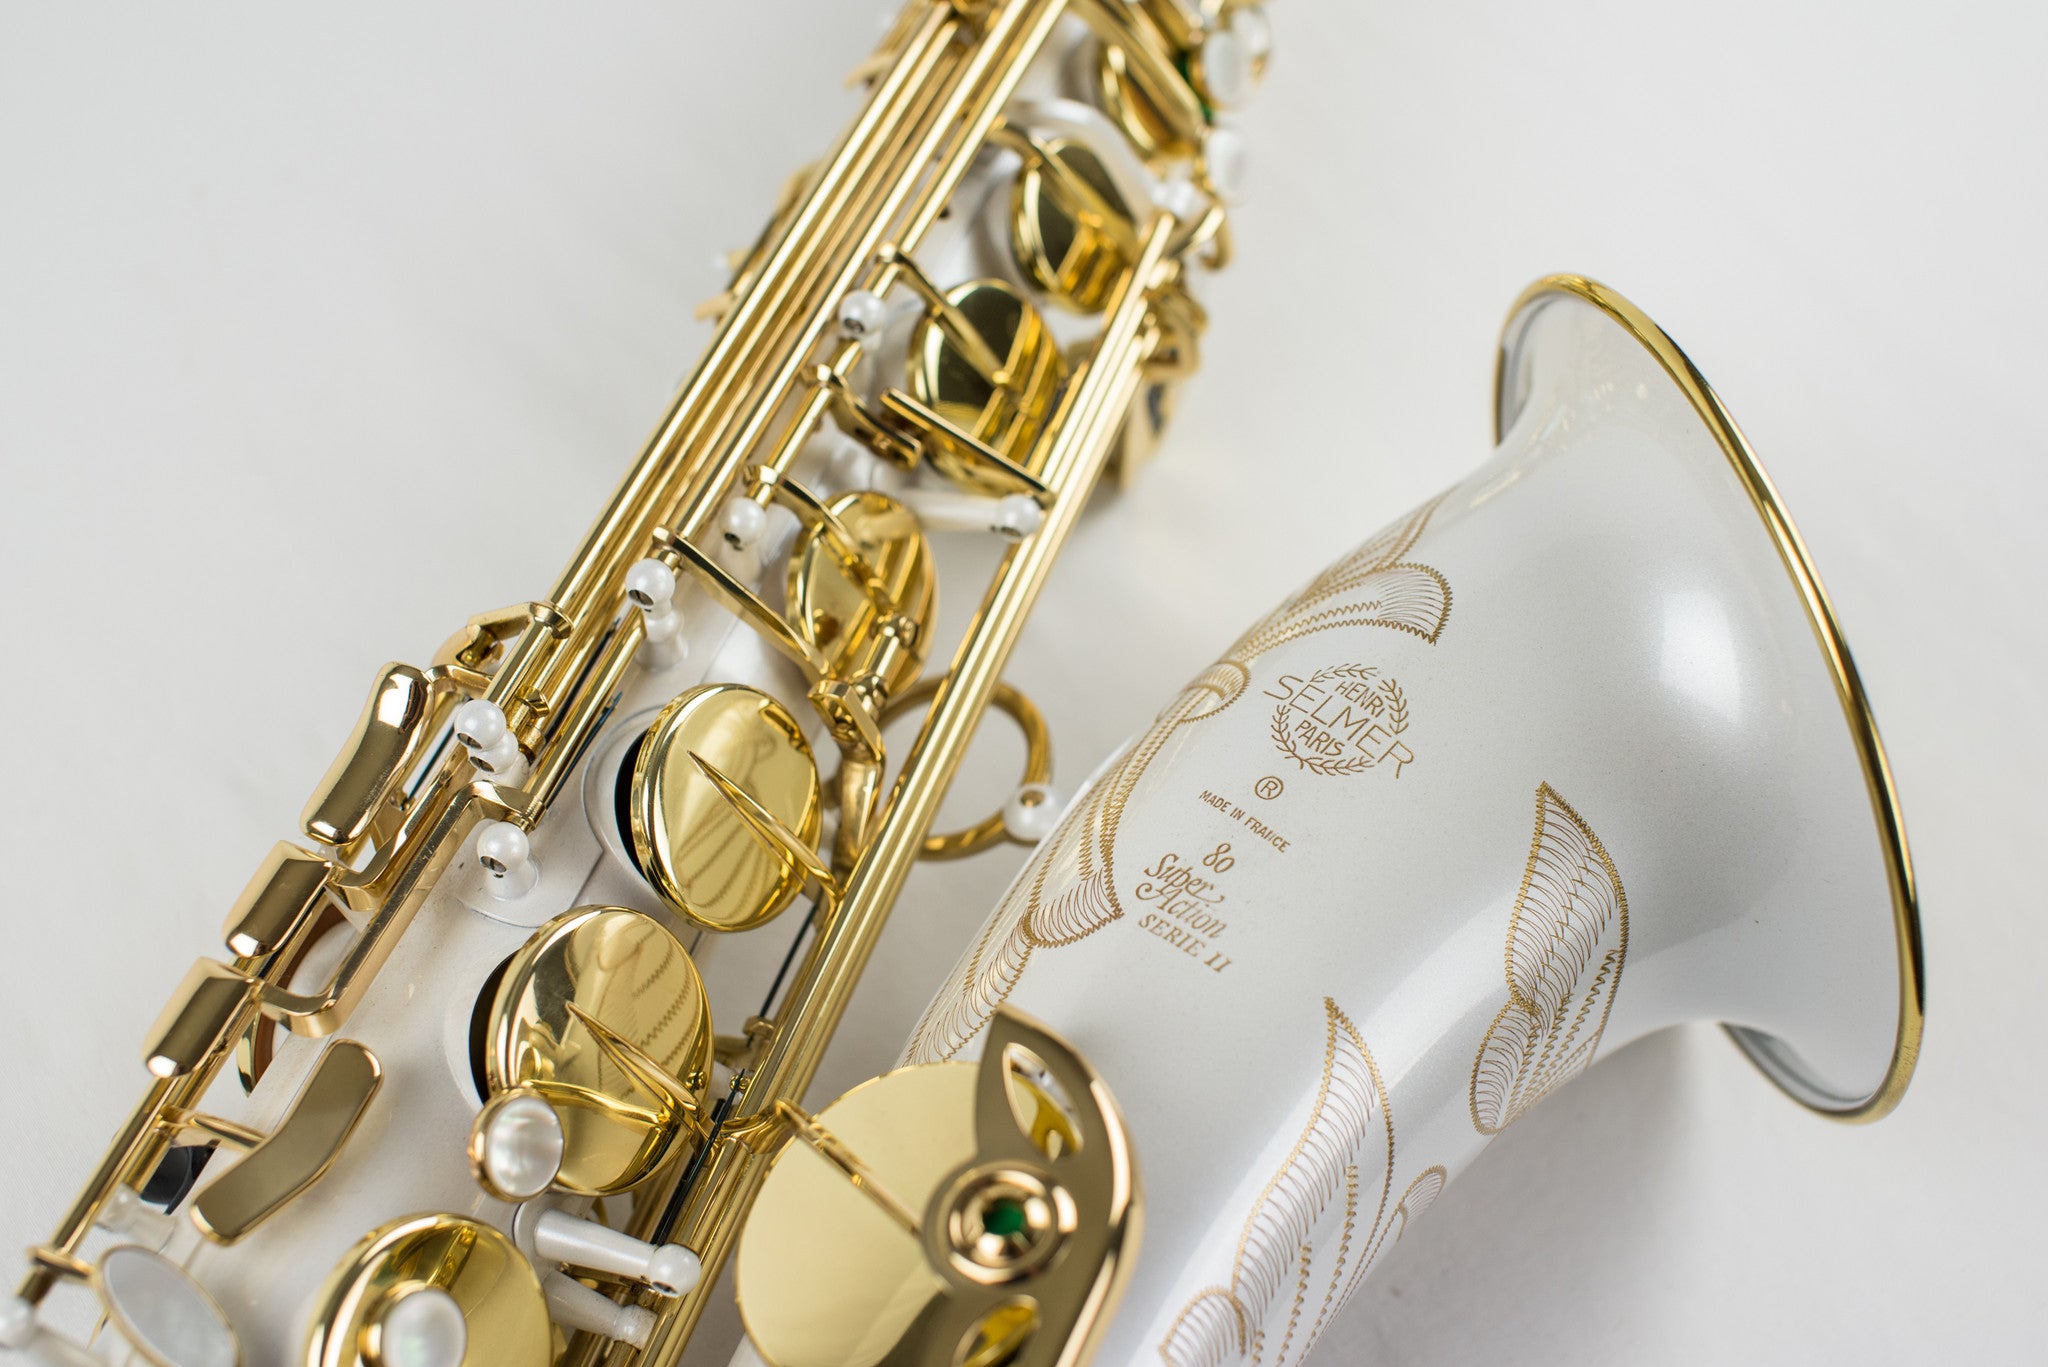 Selmer Super Action Series II Tenor Saxophone With Factory White Finish RARE!!!